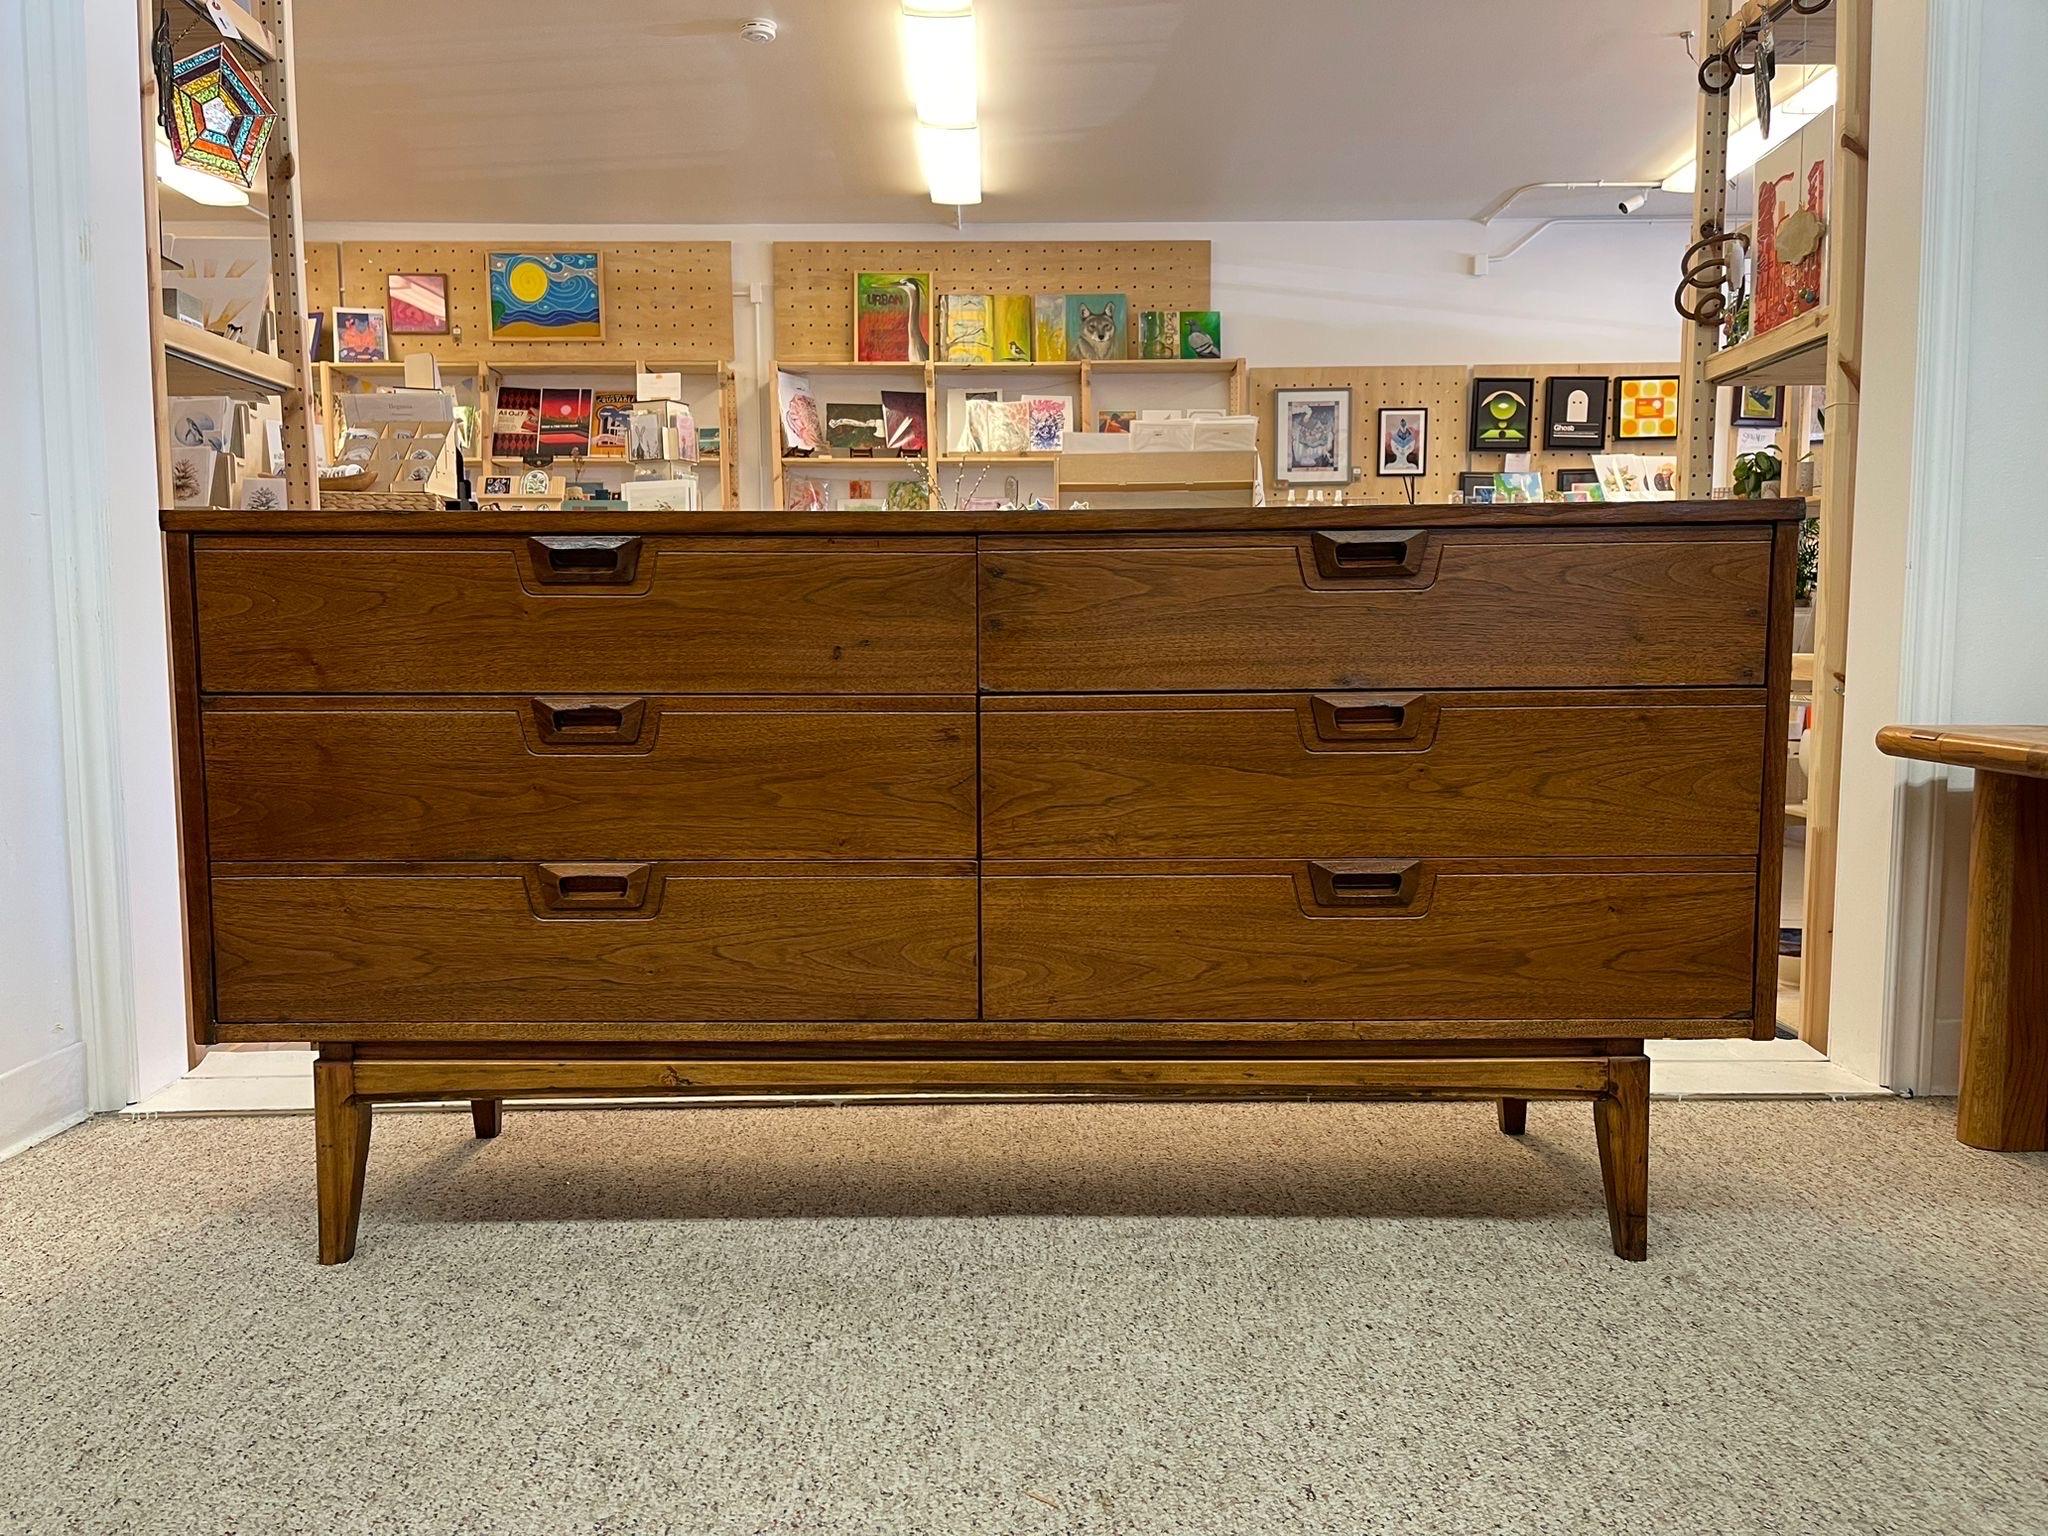 This Piece has 6 Dovetailed Drawers, walnut tone and wood carved handles. Vintage condition consistent with age as Pictured.

Dimensions. 62 W ; 18 D ; 30 H